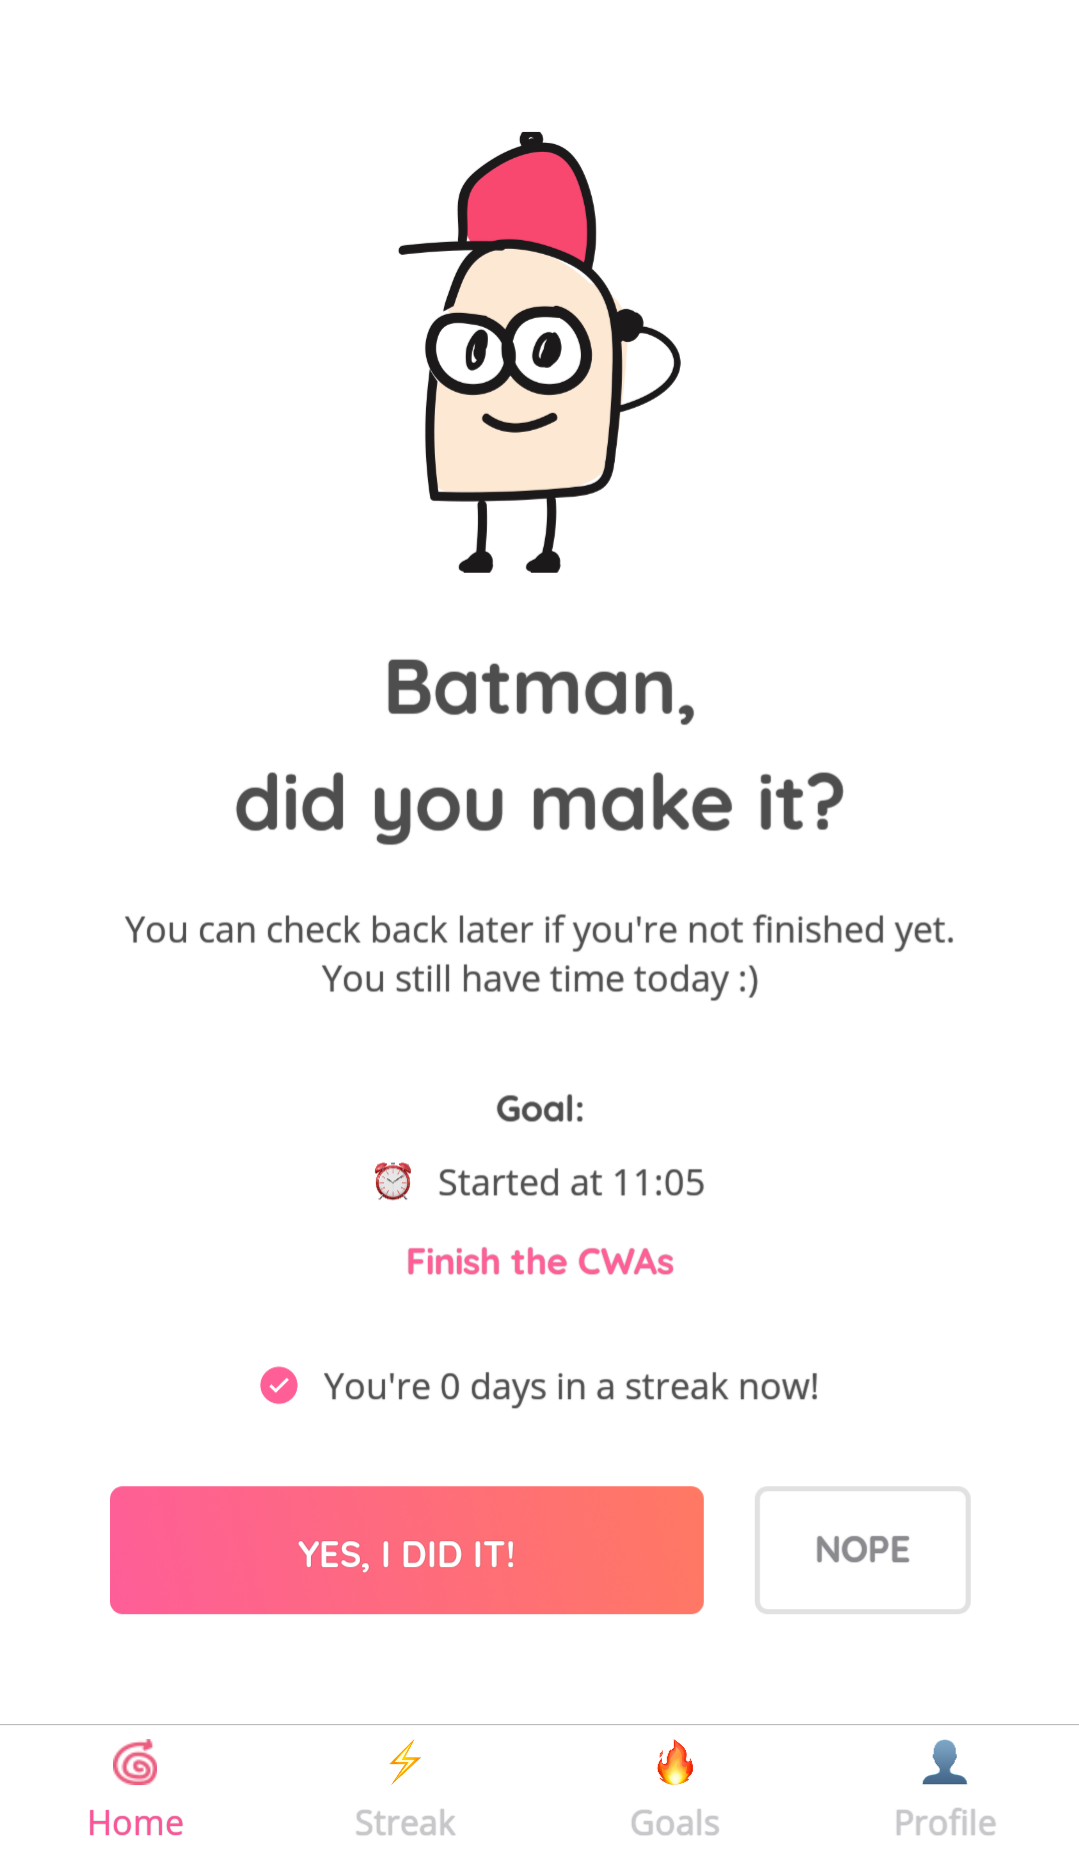 Streaky lets you set a Chain of Goal-Finishing Days